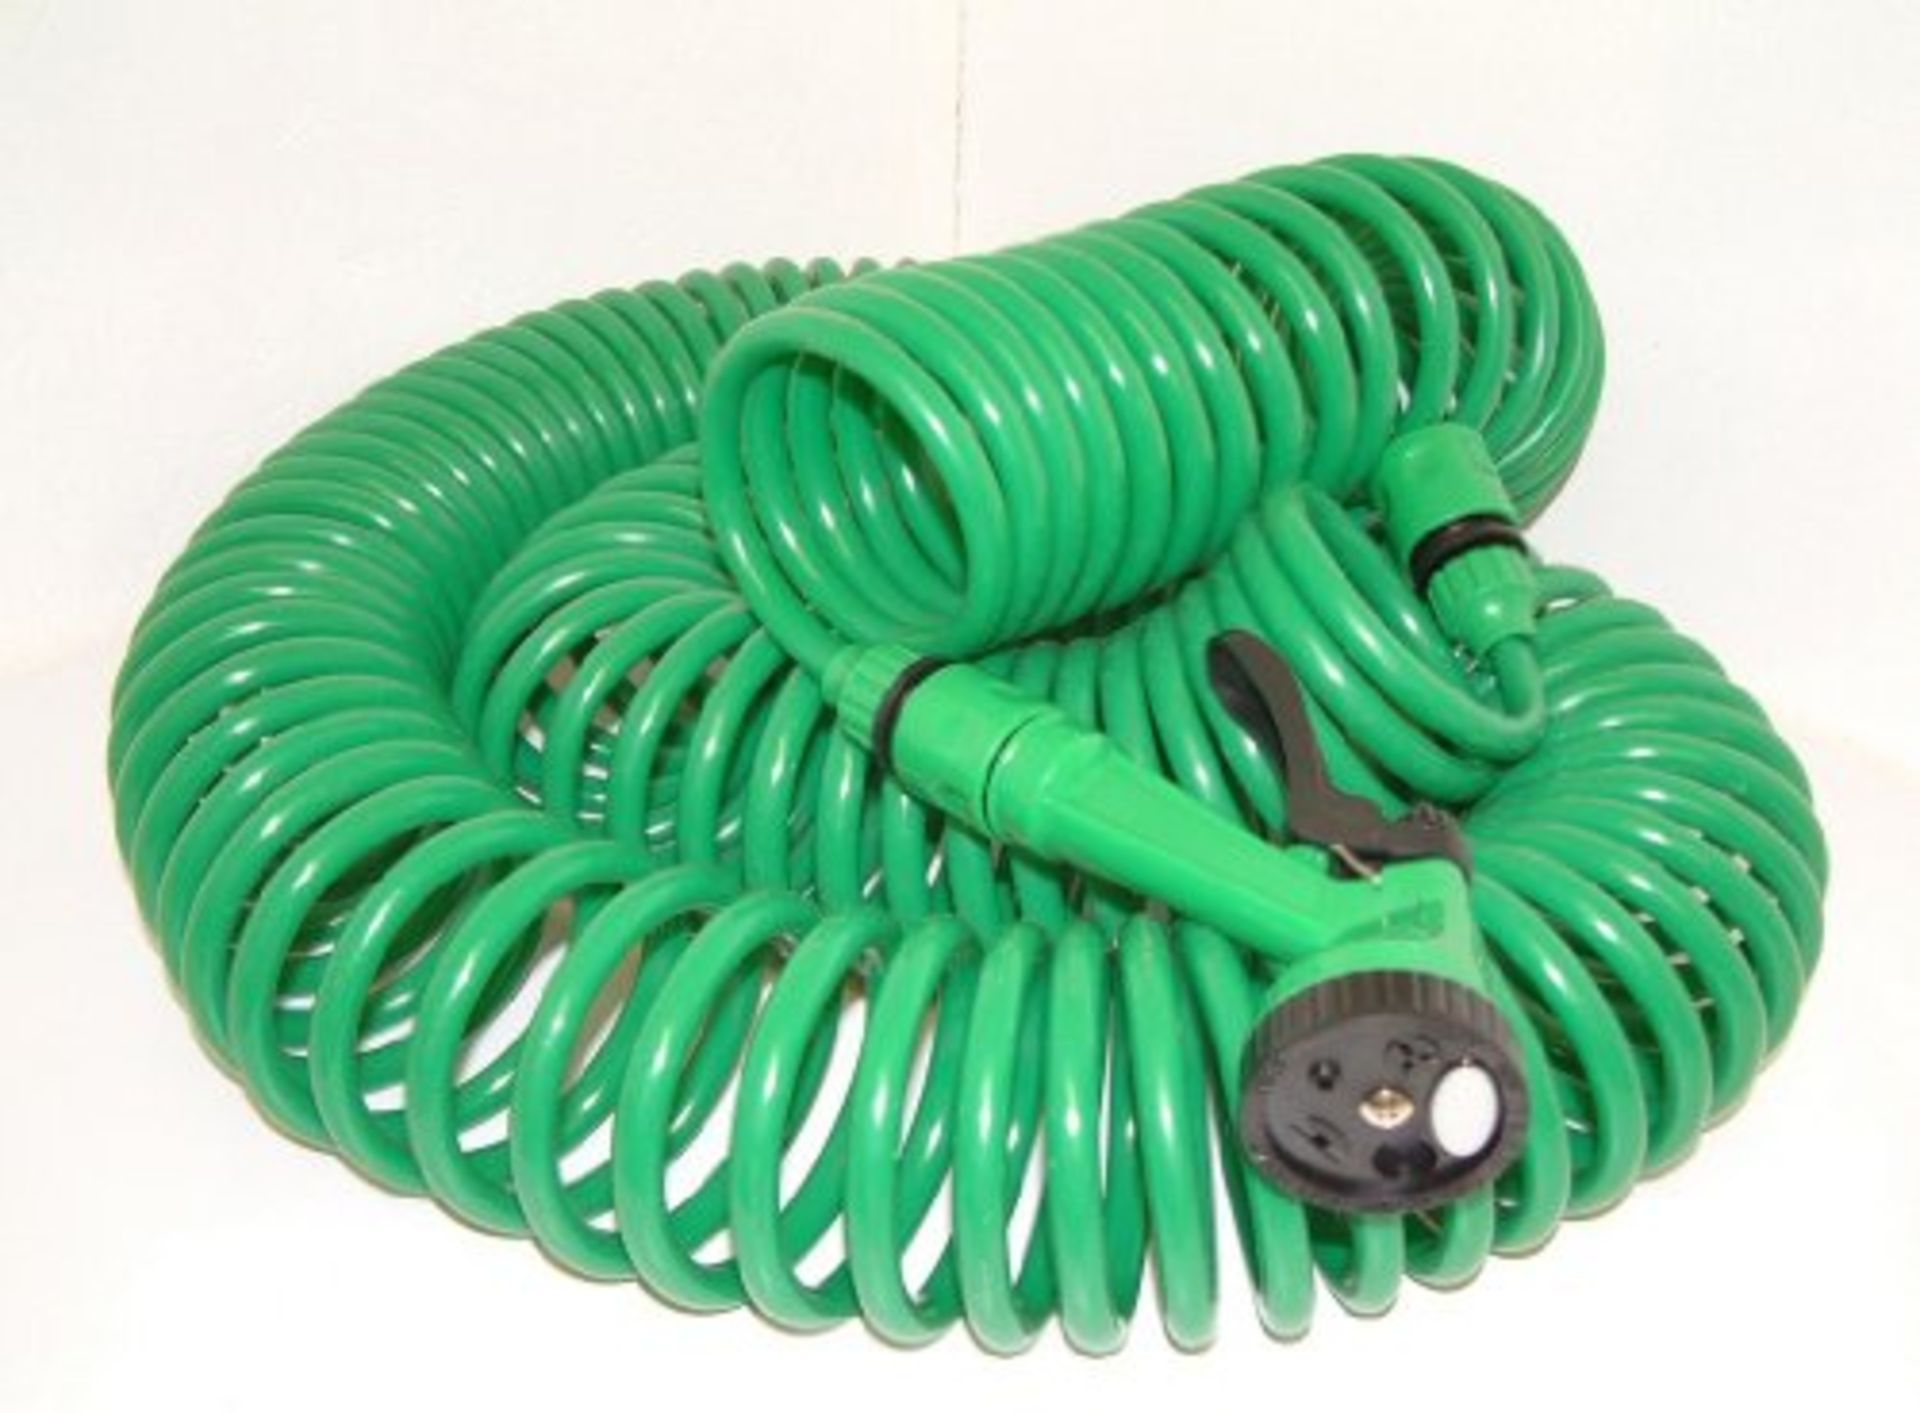 V  Grade A 30 Metre Coil Hose With Nozzle And Tap Connectors Etc - Image 2 of 2